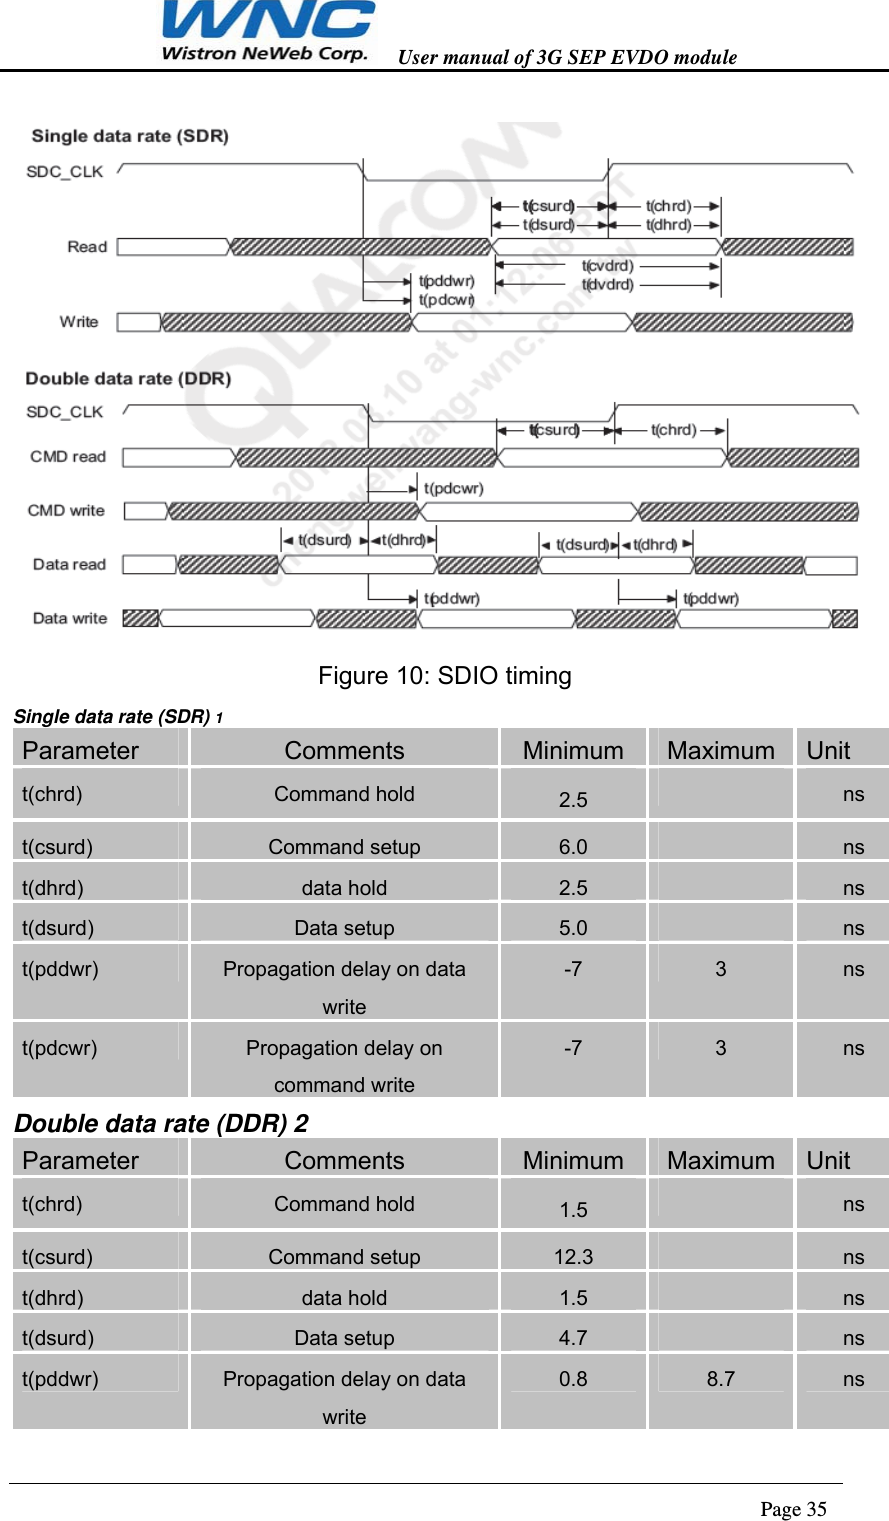   User manual of 3G SEP EVDO module                                                                      Page 35   Figure 10: SDIO timing Single data rate (SDR) 1 Parameter  Comments  Minimum  Maximum  Unit t(chrd)  Command hold  2.5   ns t(csurd)  Command setup  6.0   ns t(dhrd)  data hold  2.5   ns t(dsurd)  Data setup  5.0   ns t(pddwr)  Propagation delay on data write -7  3  ns t(pdcwr)  Propagation delay on command write -7  3  ns Double data rate (DDR) 2 Parameter  Comments  Minimum  Maximum  Unit t(chrd)  Command hold  1.5   ns t(csurd)  Command setup  12.3   ns t(dhrd)  data hold  1.5   ns t(dsurd)  Data setup  4.7   ns t(pddwr)  Propagation delay on data write 0.8  8.7  ns 